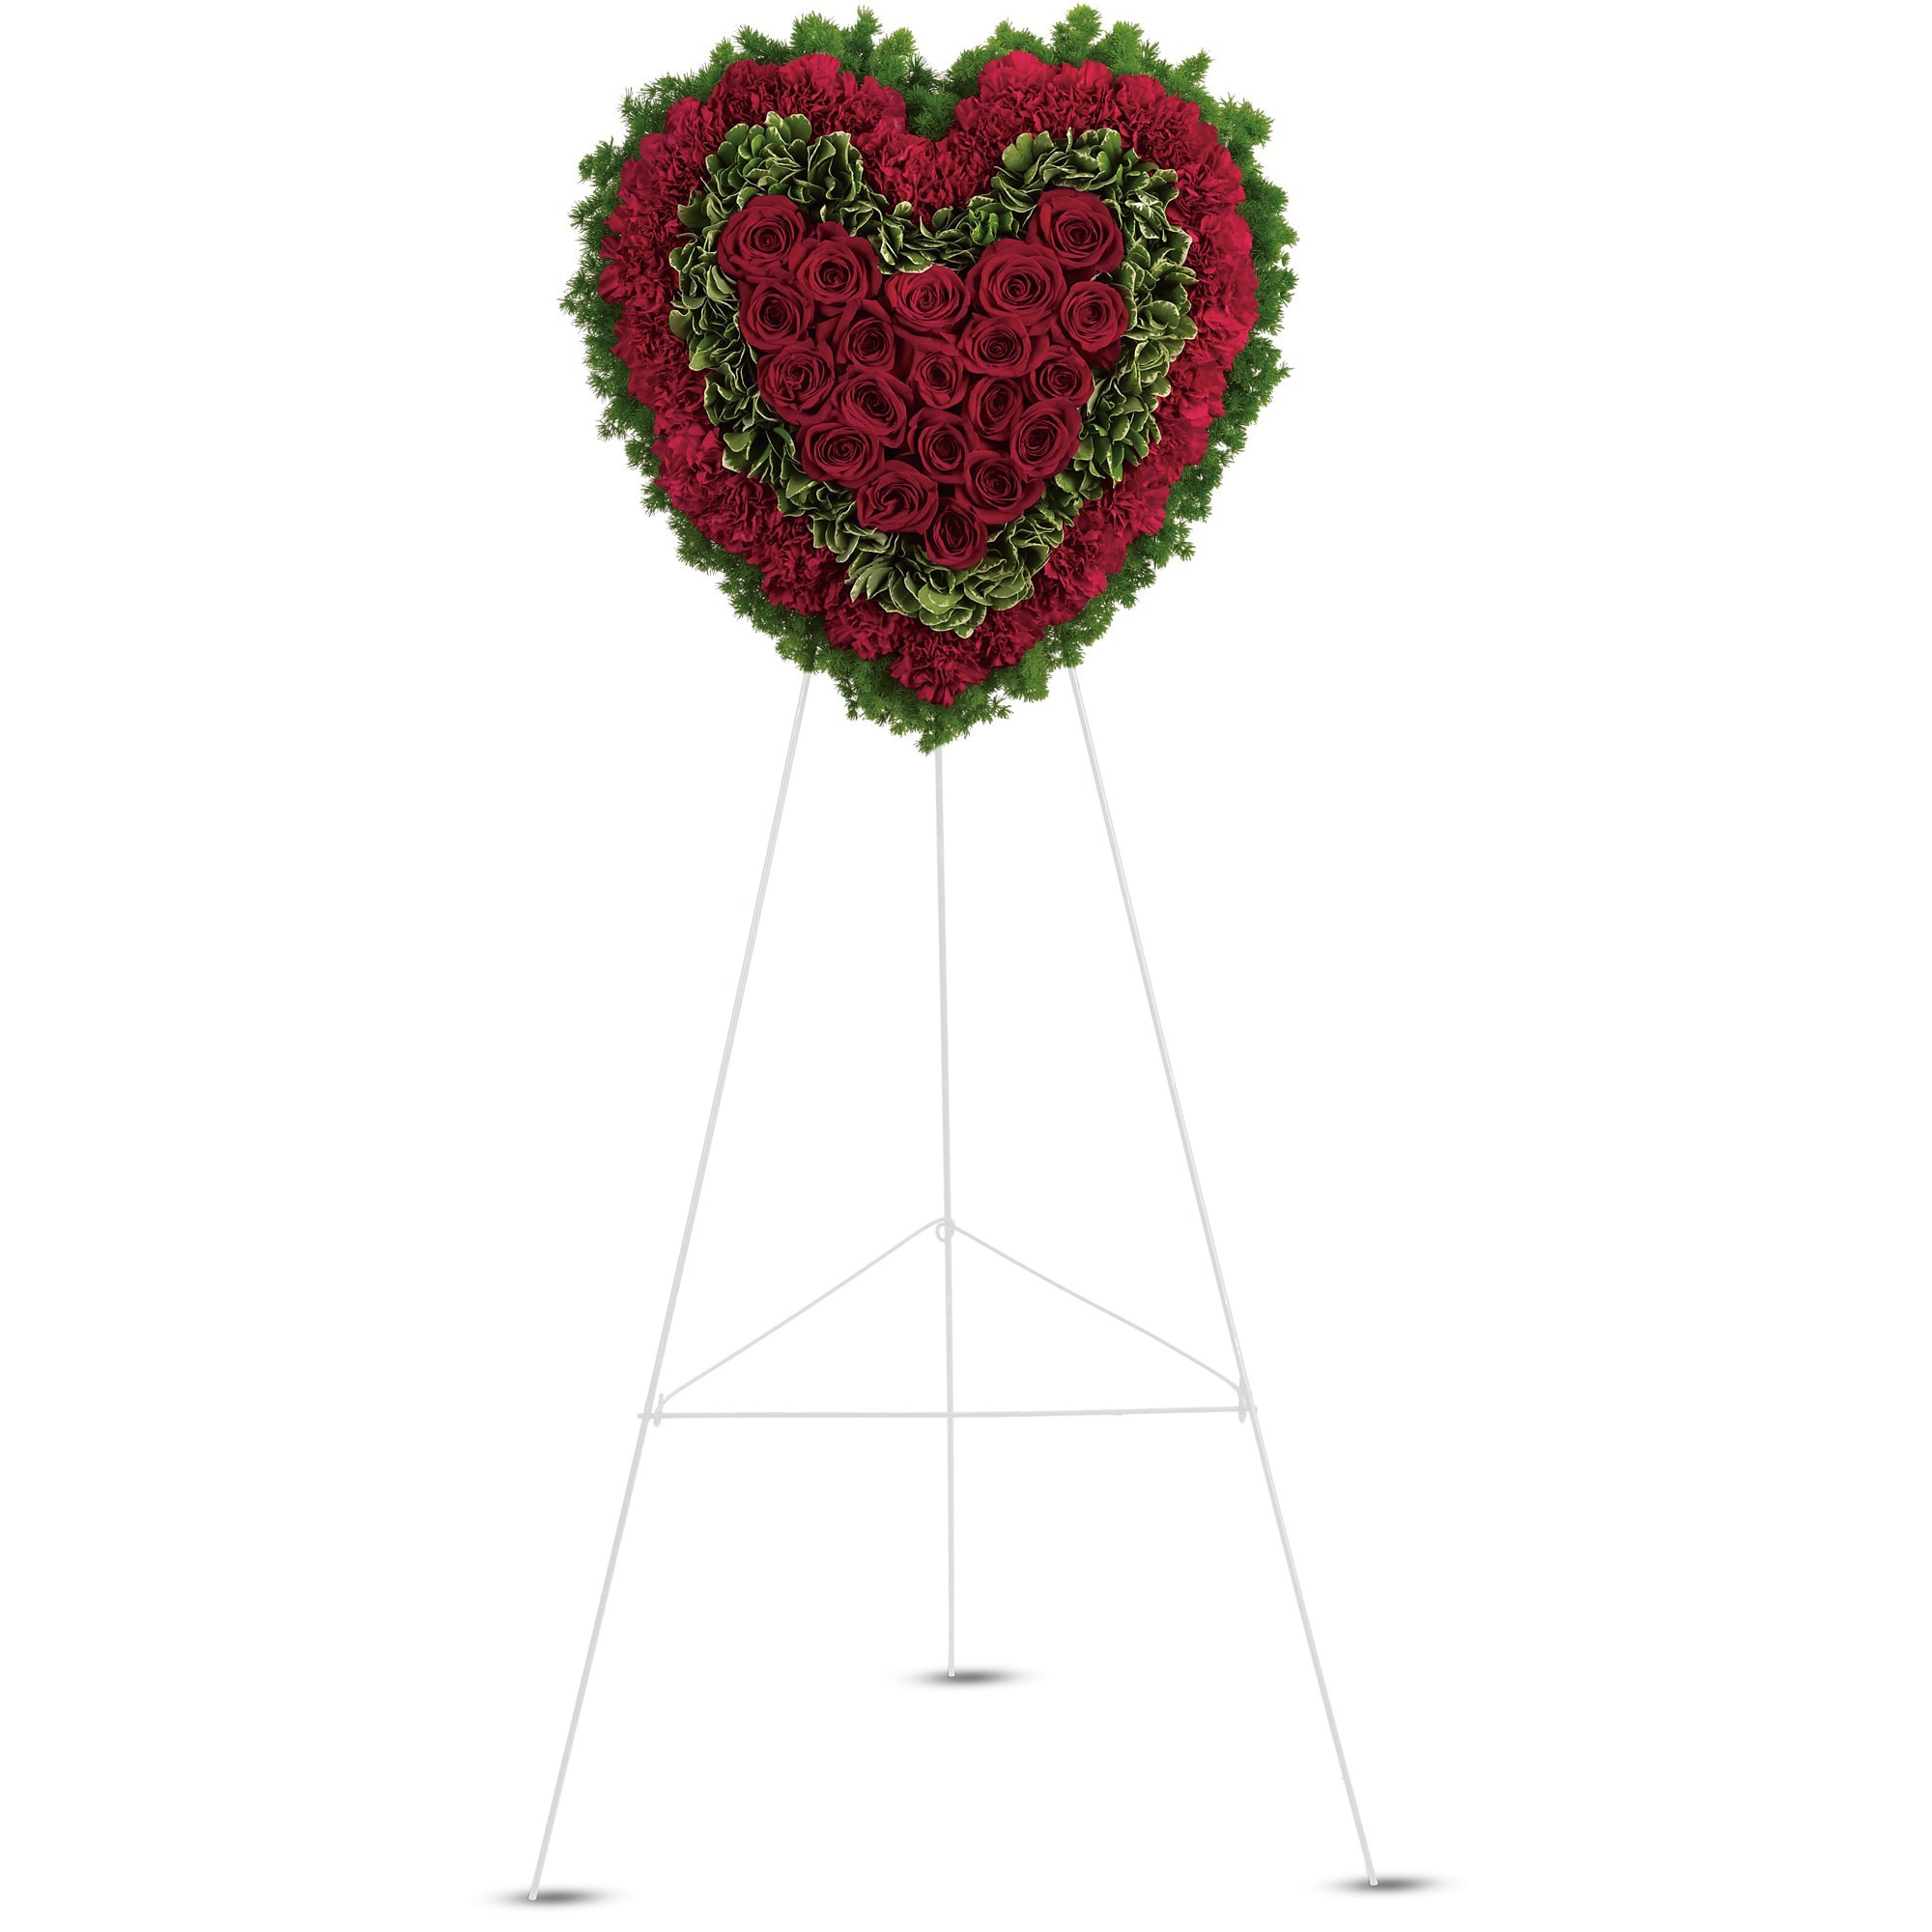 Majestic Heart by Teleflora - Remember a loved one's generous heart with this red arrangement in a classic heart shape, a declaration of eternal love and devotion. 